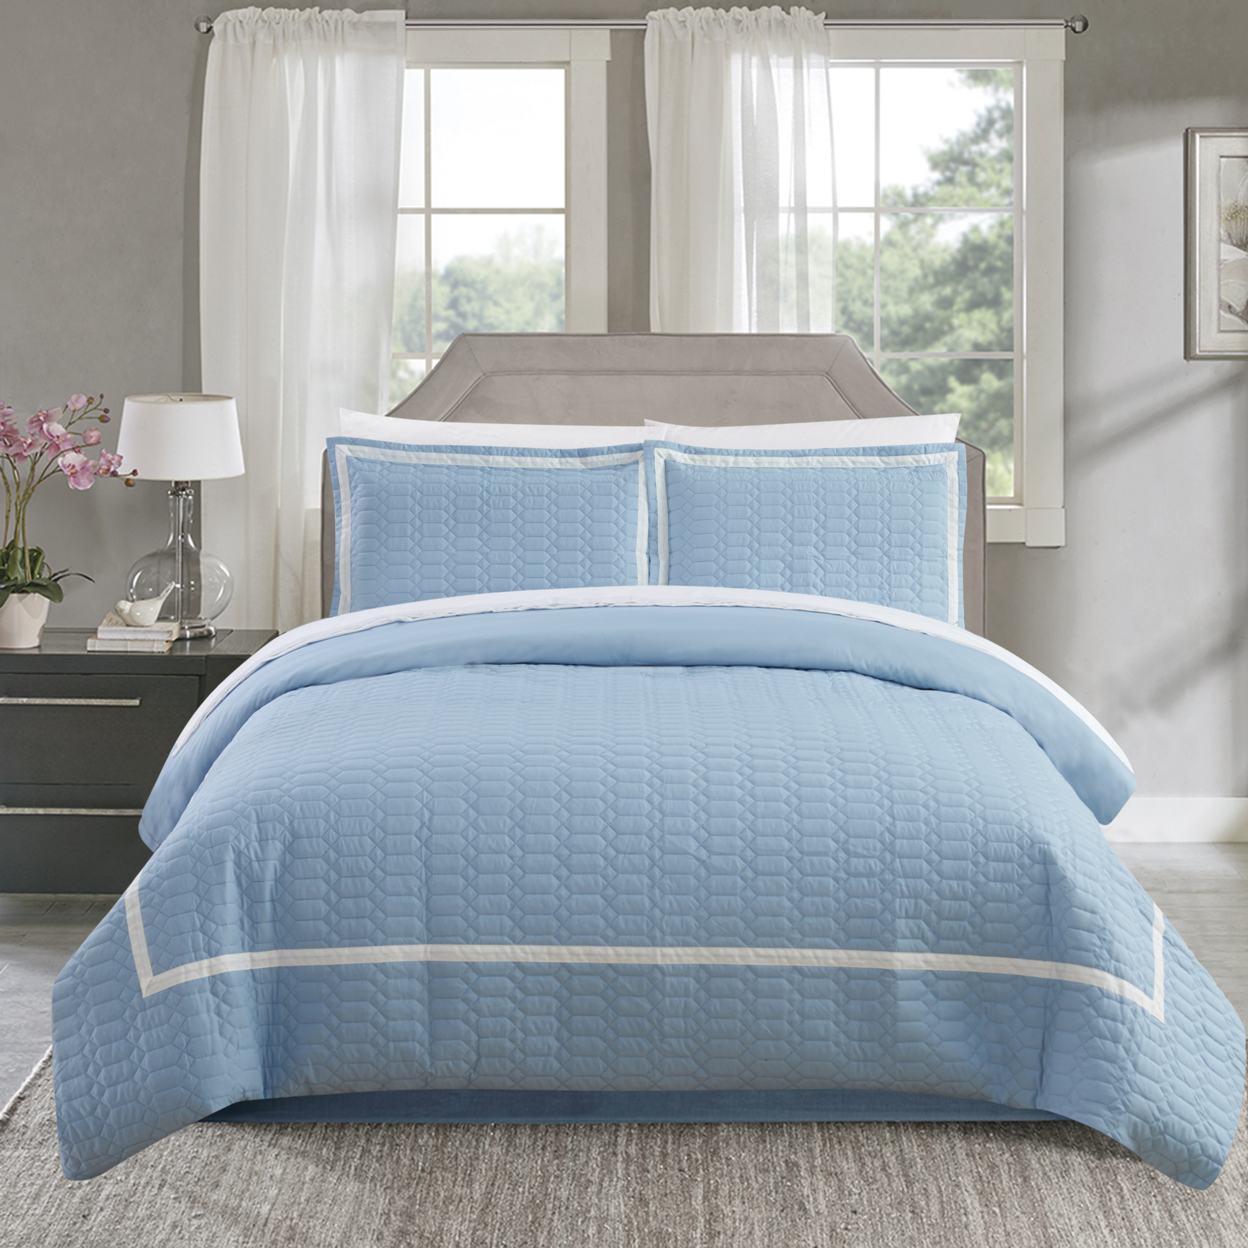 Dawn 2 Piece Duvet Cover Set Hotel Collection Two Tone Banded Print Zipper Closure - Blue, King